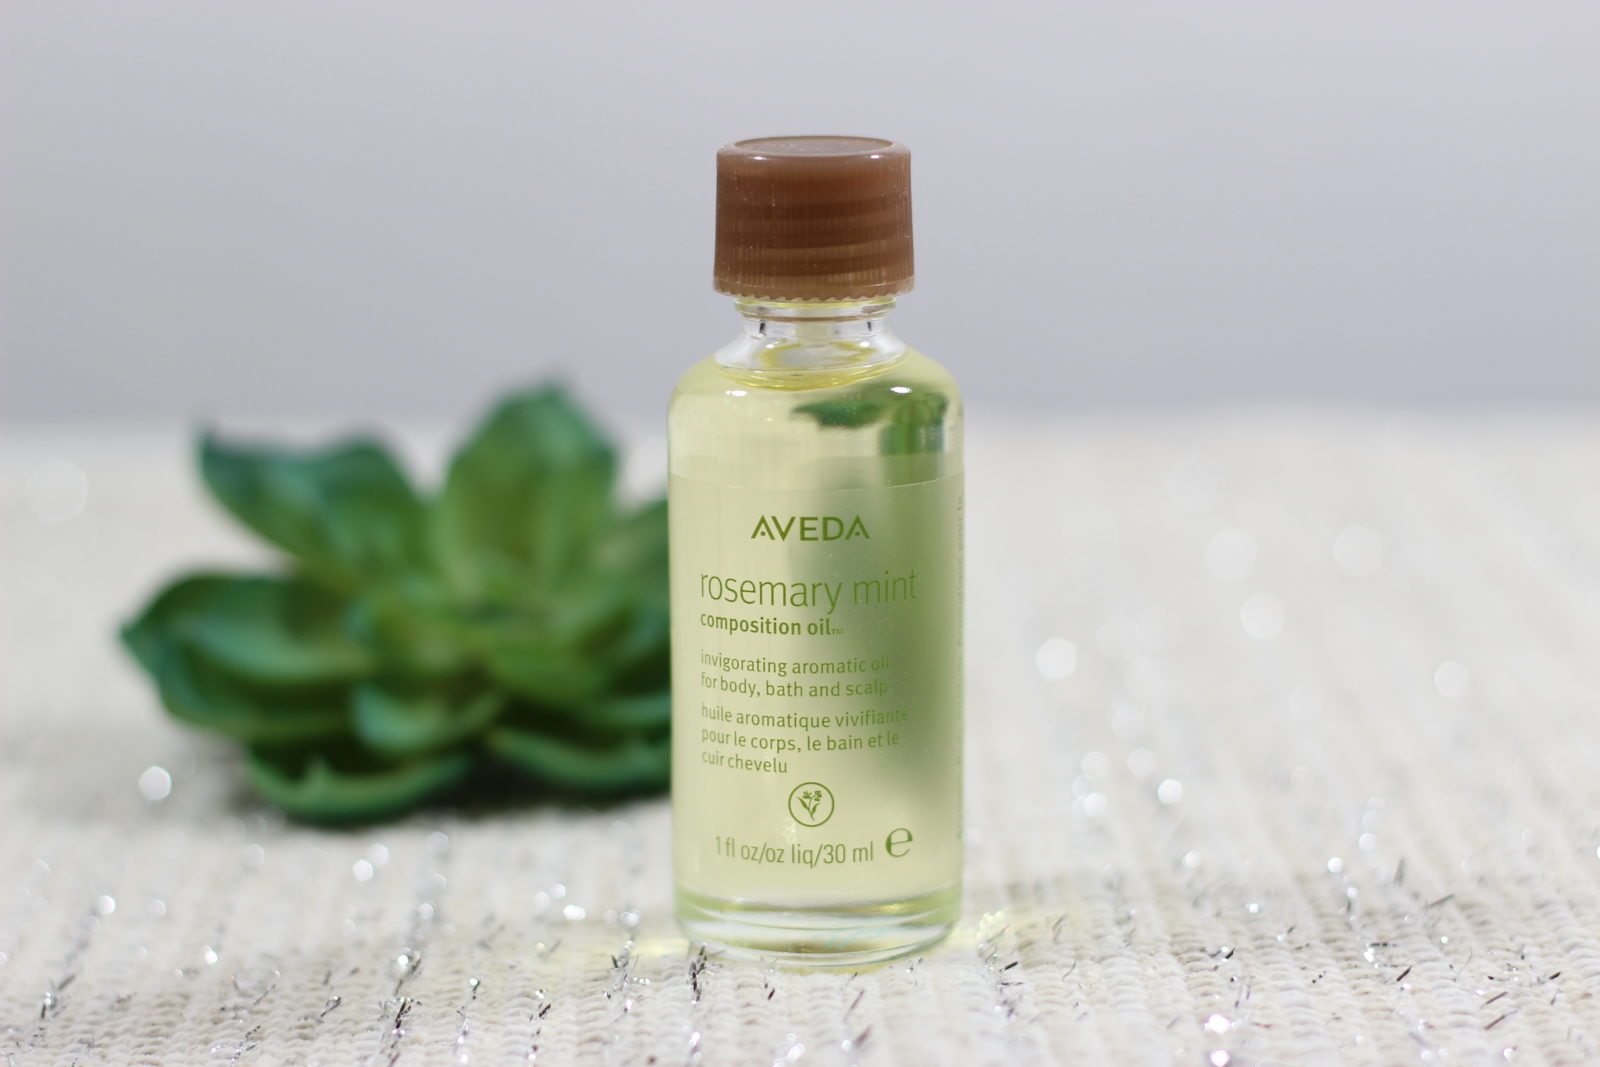 Aveda Rosemary Mint Oil Review